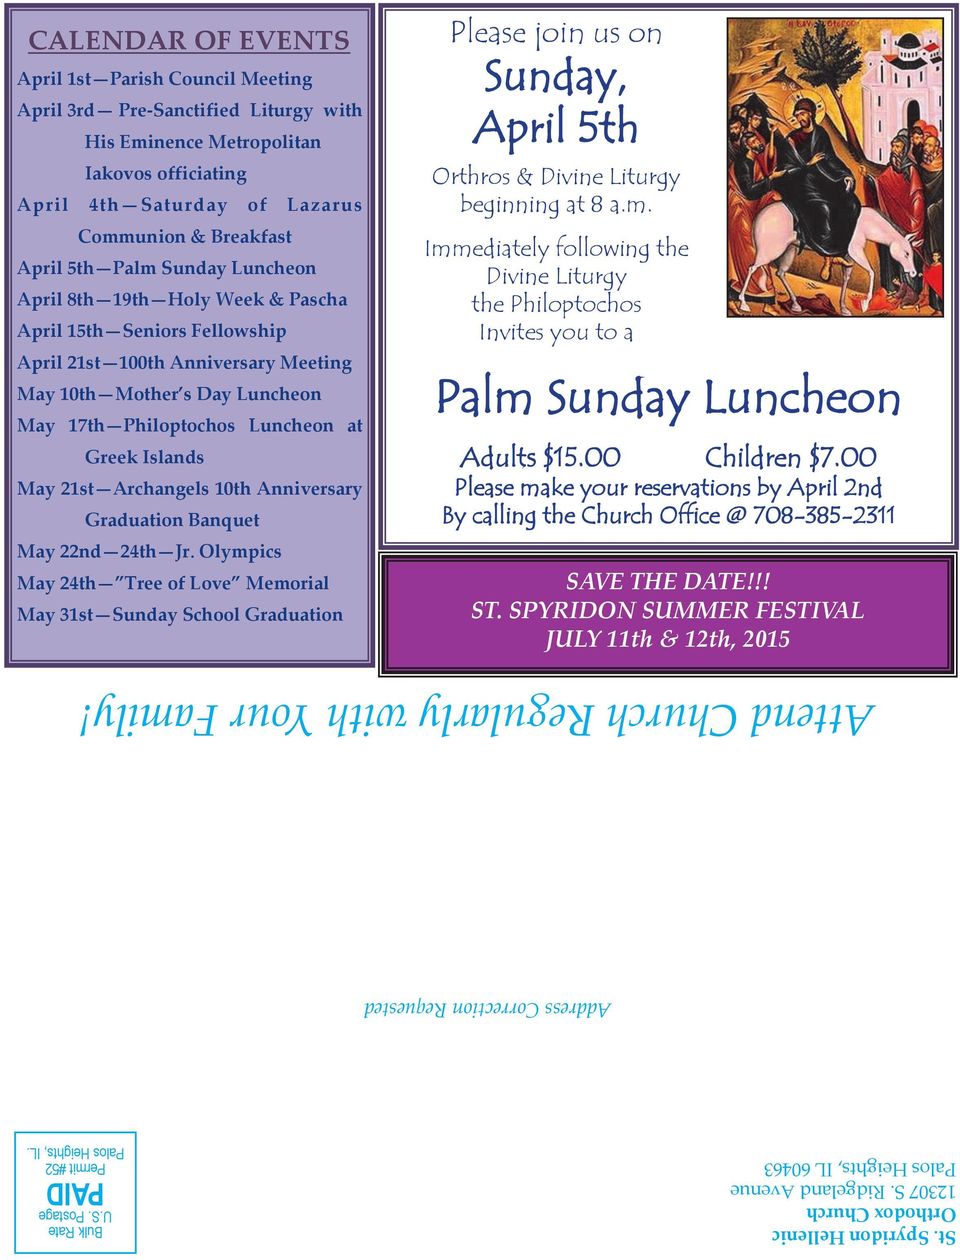 Palm Sunday Luncheon April 8th 19th Holy Week & Pascha April 15th Seniors Fellowship April 21st 100th Anniversary Meeting May 10th Mother s Day Luncheon May 17th Philoptochos Luncheon at Greek